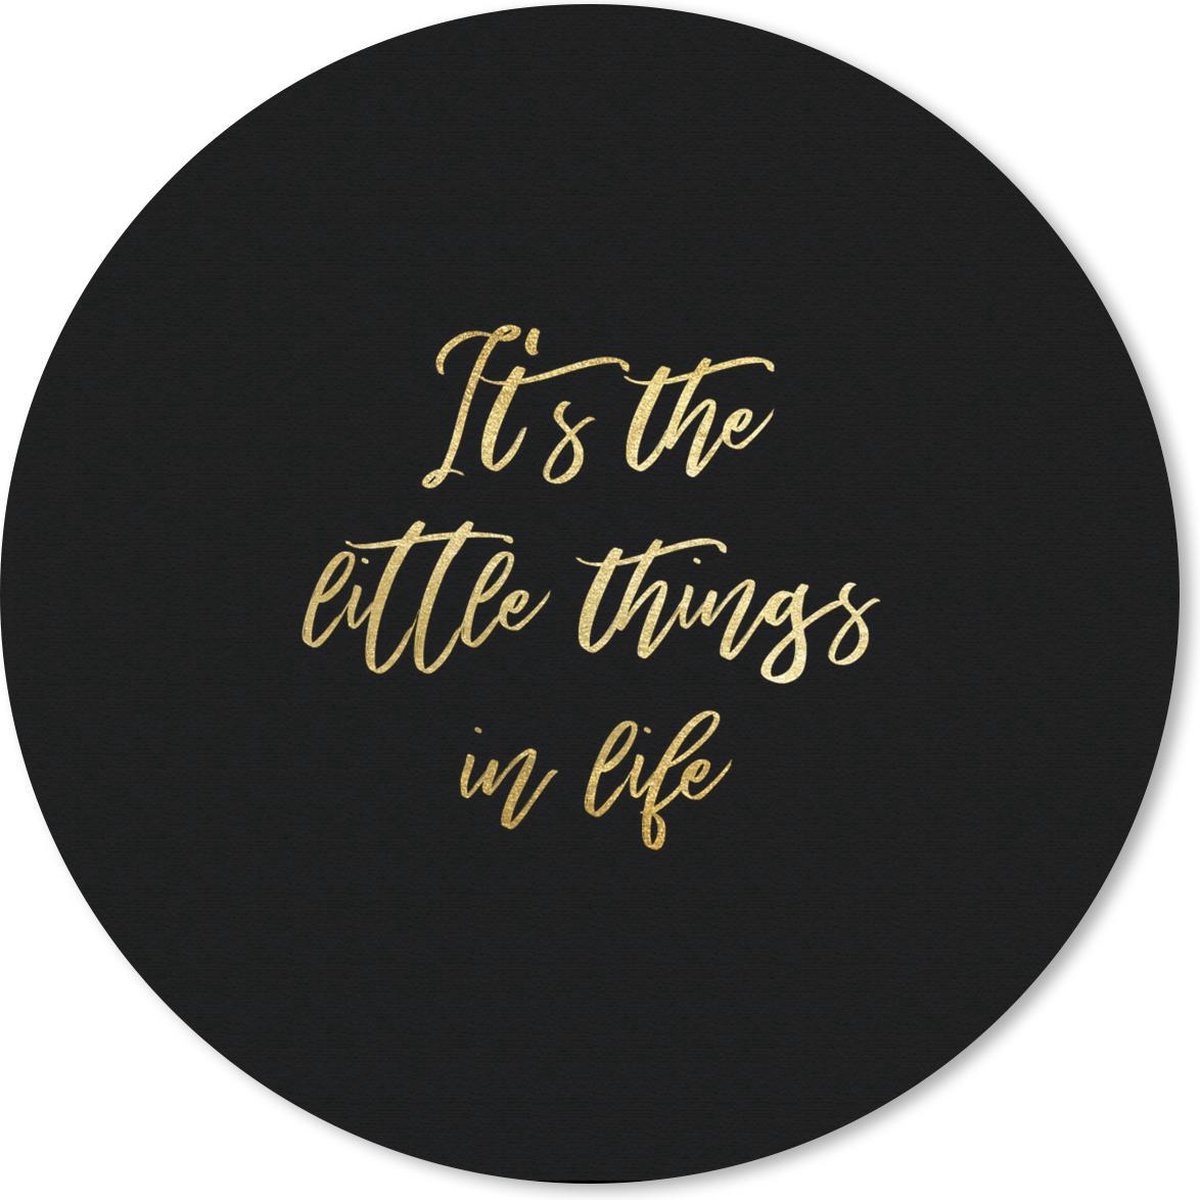 Muismat - Mousepad - Rond - Quote - Life - Black and gold - 40x40 cm - Ronde muismat